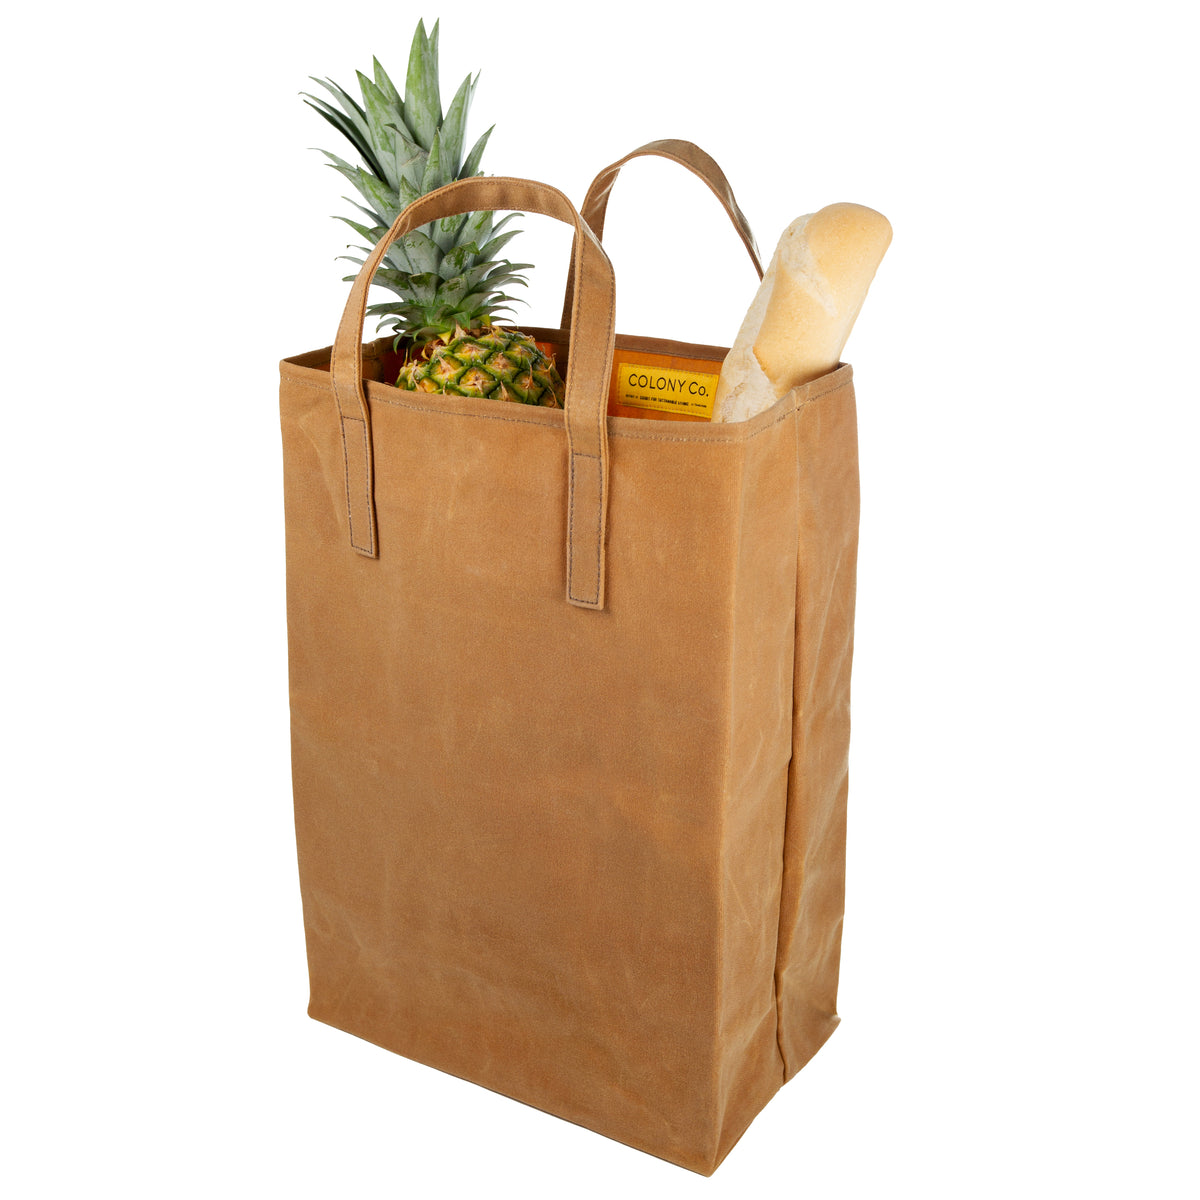 Indicus Bag  Supplier & Decorator of Eco-Friendly Canvas Bags &  Promotional Products: Hotel & Resort Laundry Bag - 5 Oz Cotton